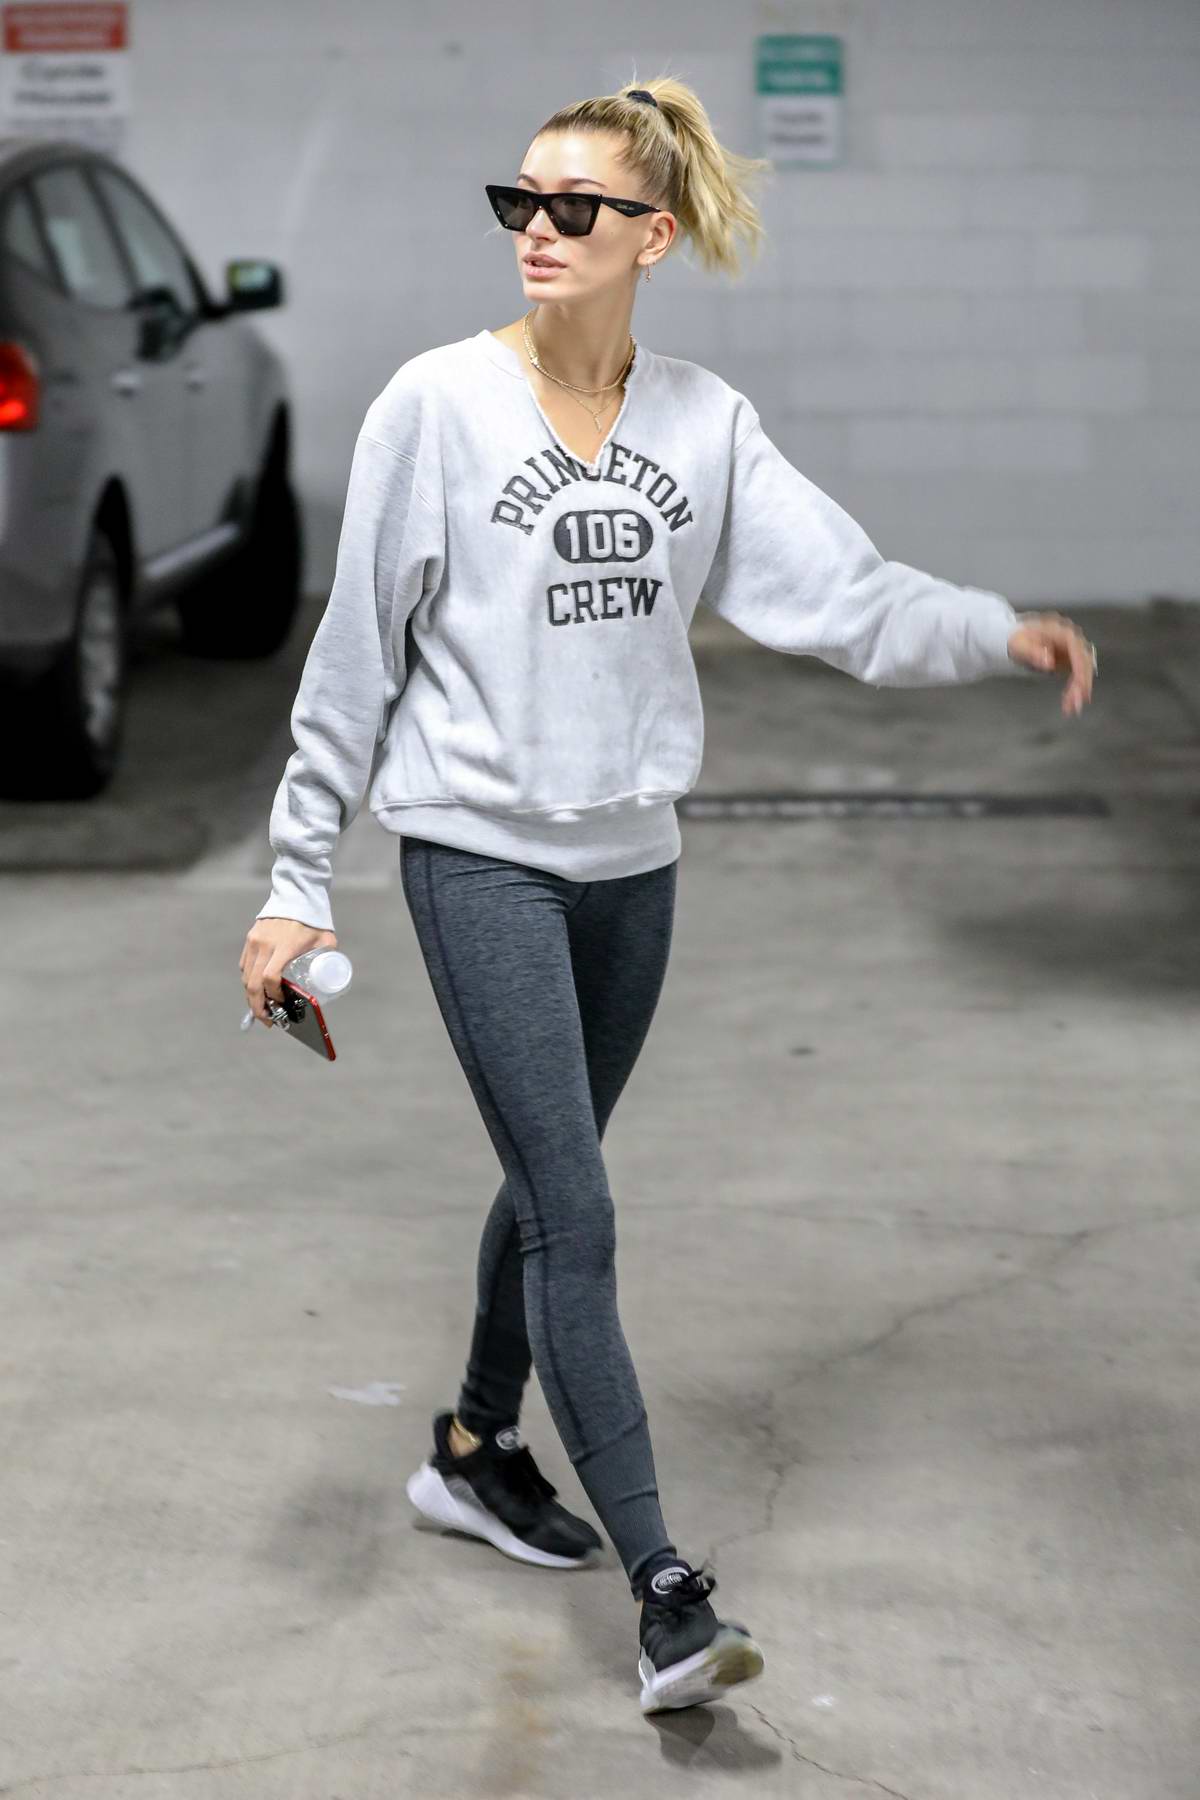 Hailey Bieber flaunts her street style in leggings and crewneck sweater